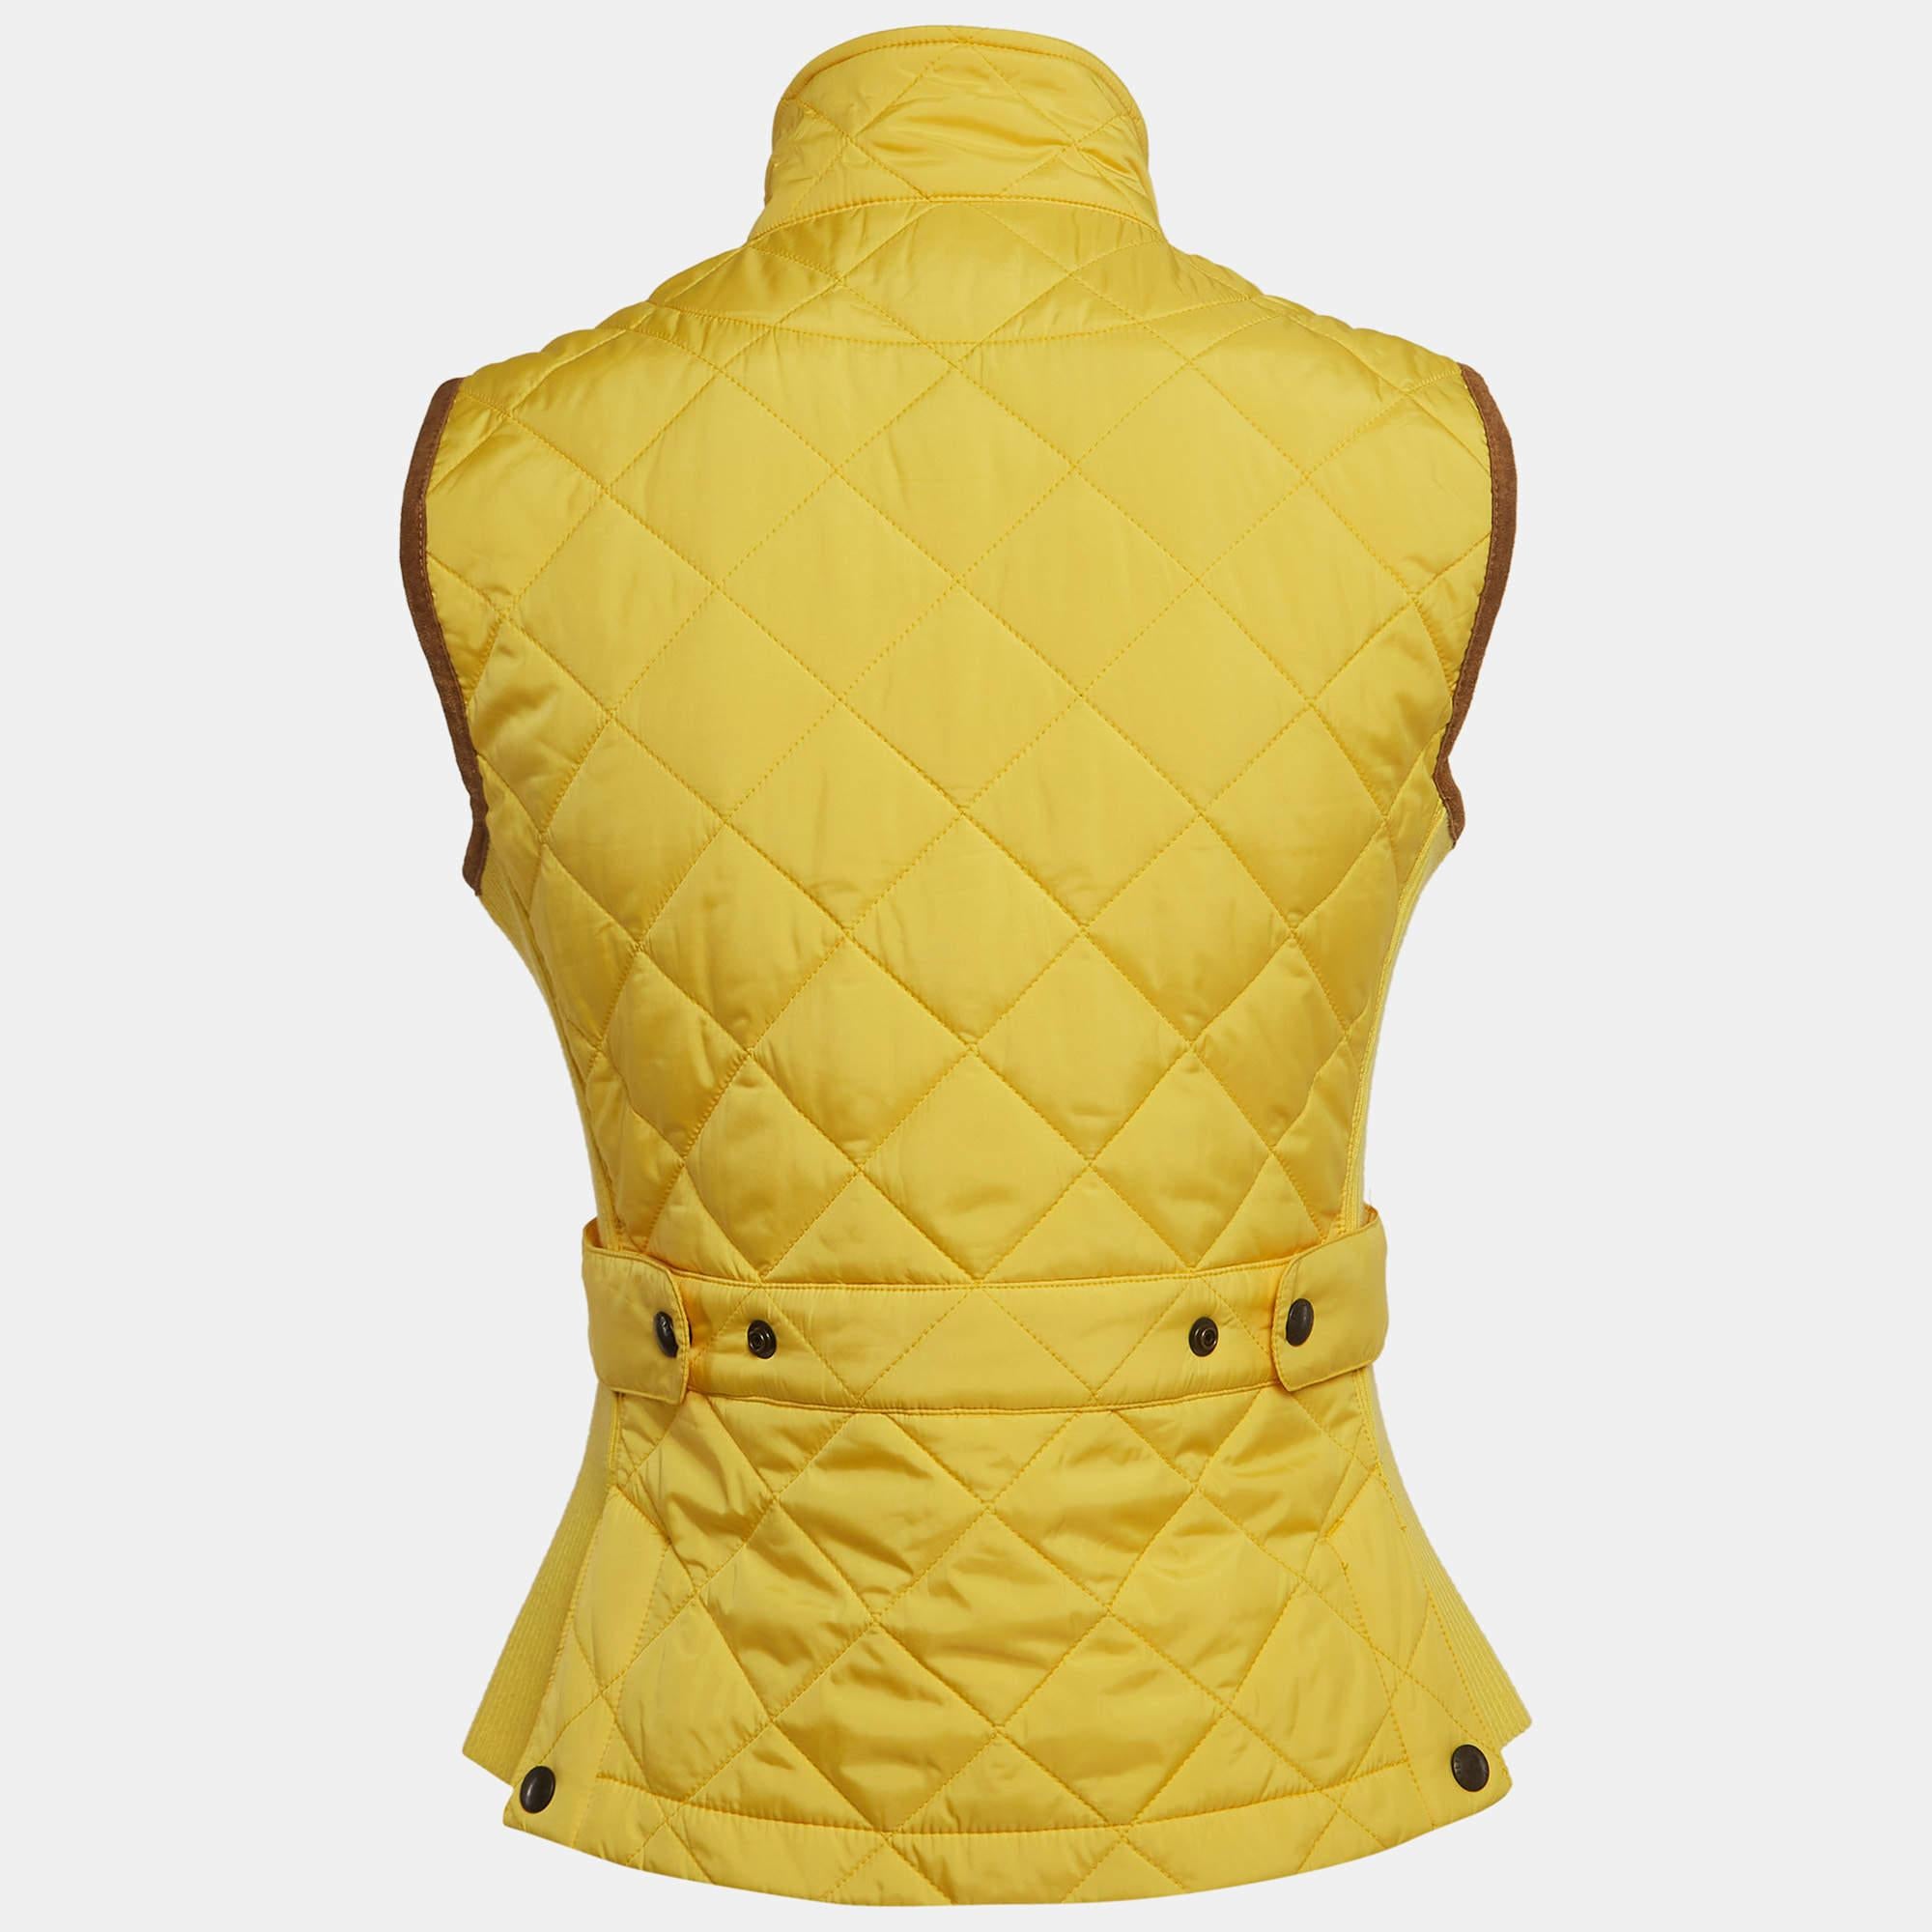 Immerse yourself in the vibrant charm of the Ralph Lauren Sport vest. Crafted with meticulous attention, this vest boasts a sunny yellow hue, adorned with exquisite embroidery and sleek suede trim, offering both style and functionality for your